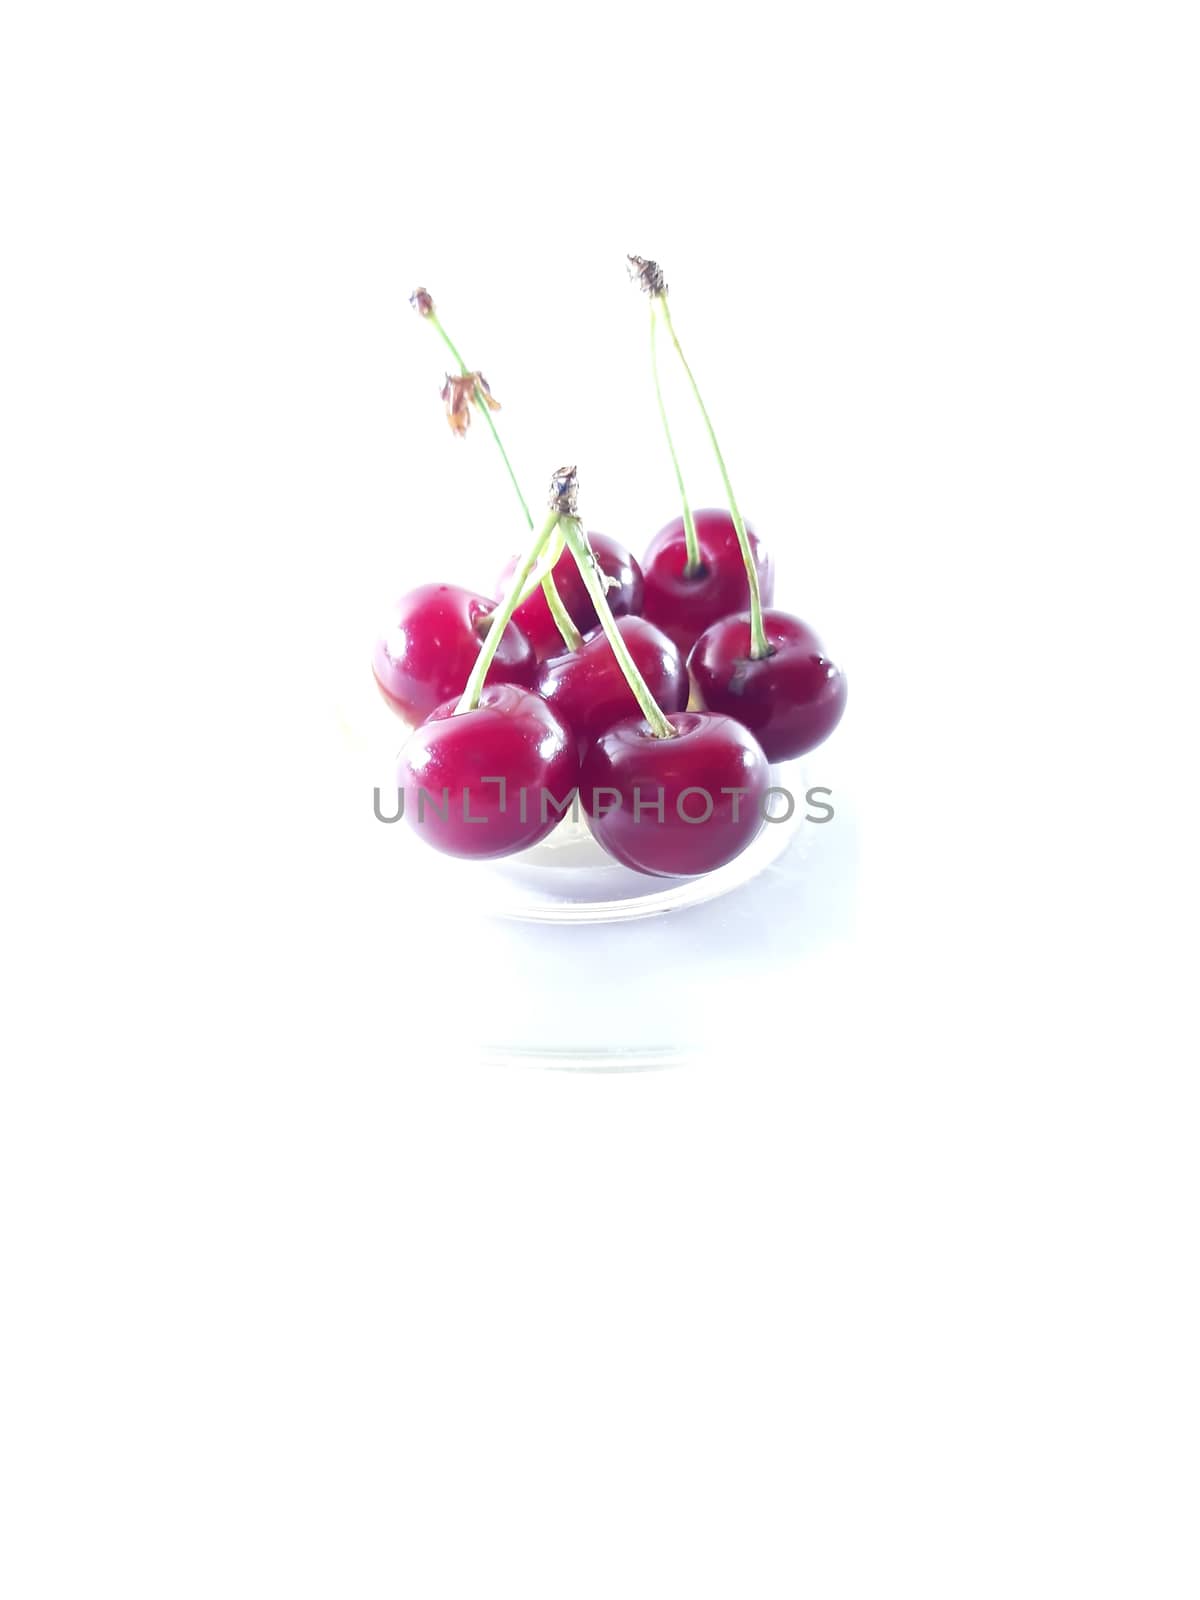 Photo cherry on a transparent plate. Healthy food. Vegetarian re by polyachenkovv@gmail.com